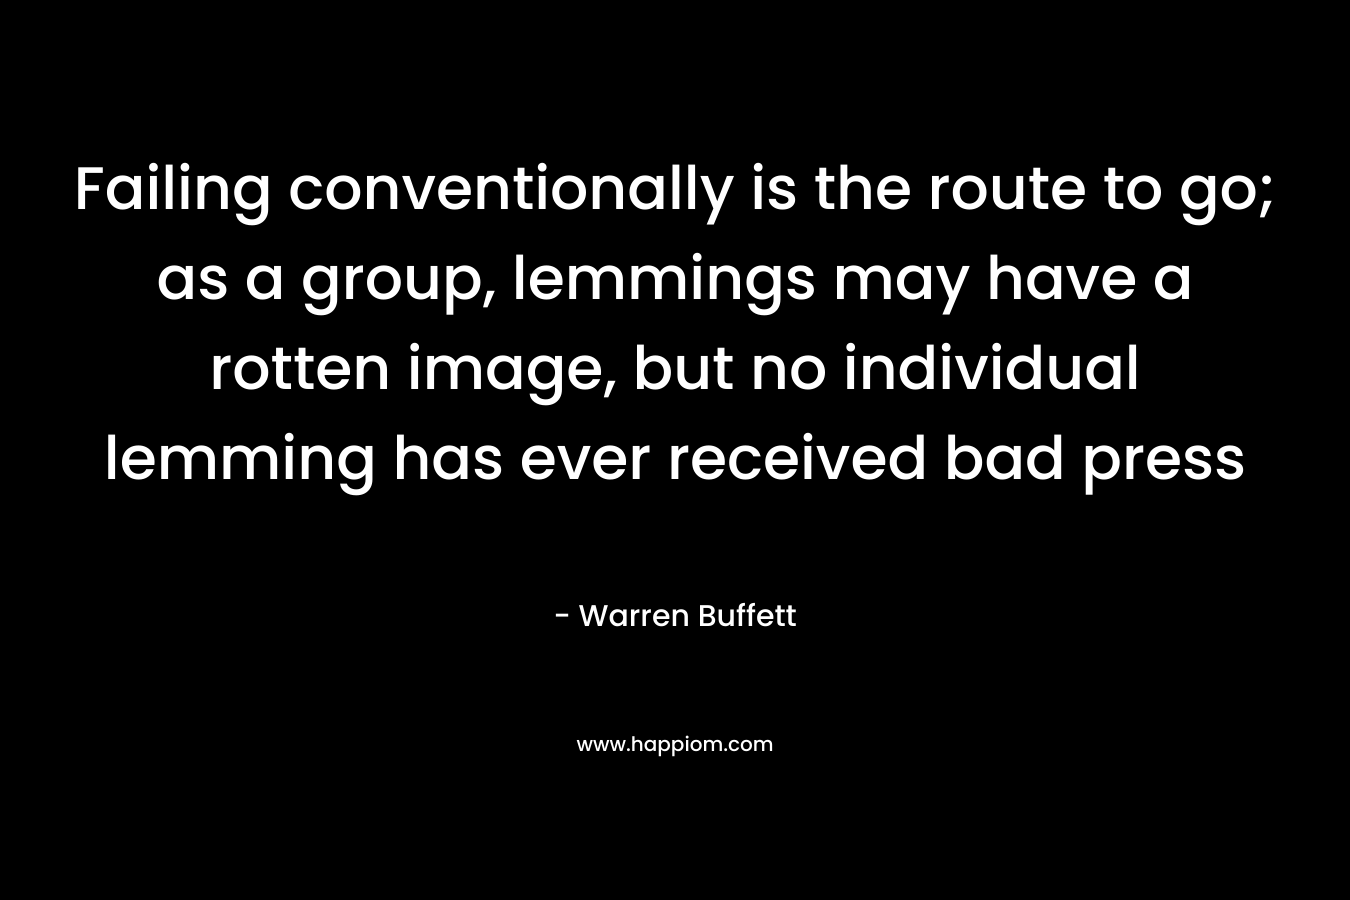 Failing conventionally is the route to go; as a group, lemmings may have a rotten image, but no individual lemming has ever received bad press – Warren Buffett